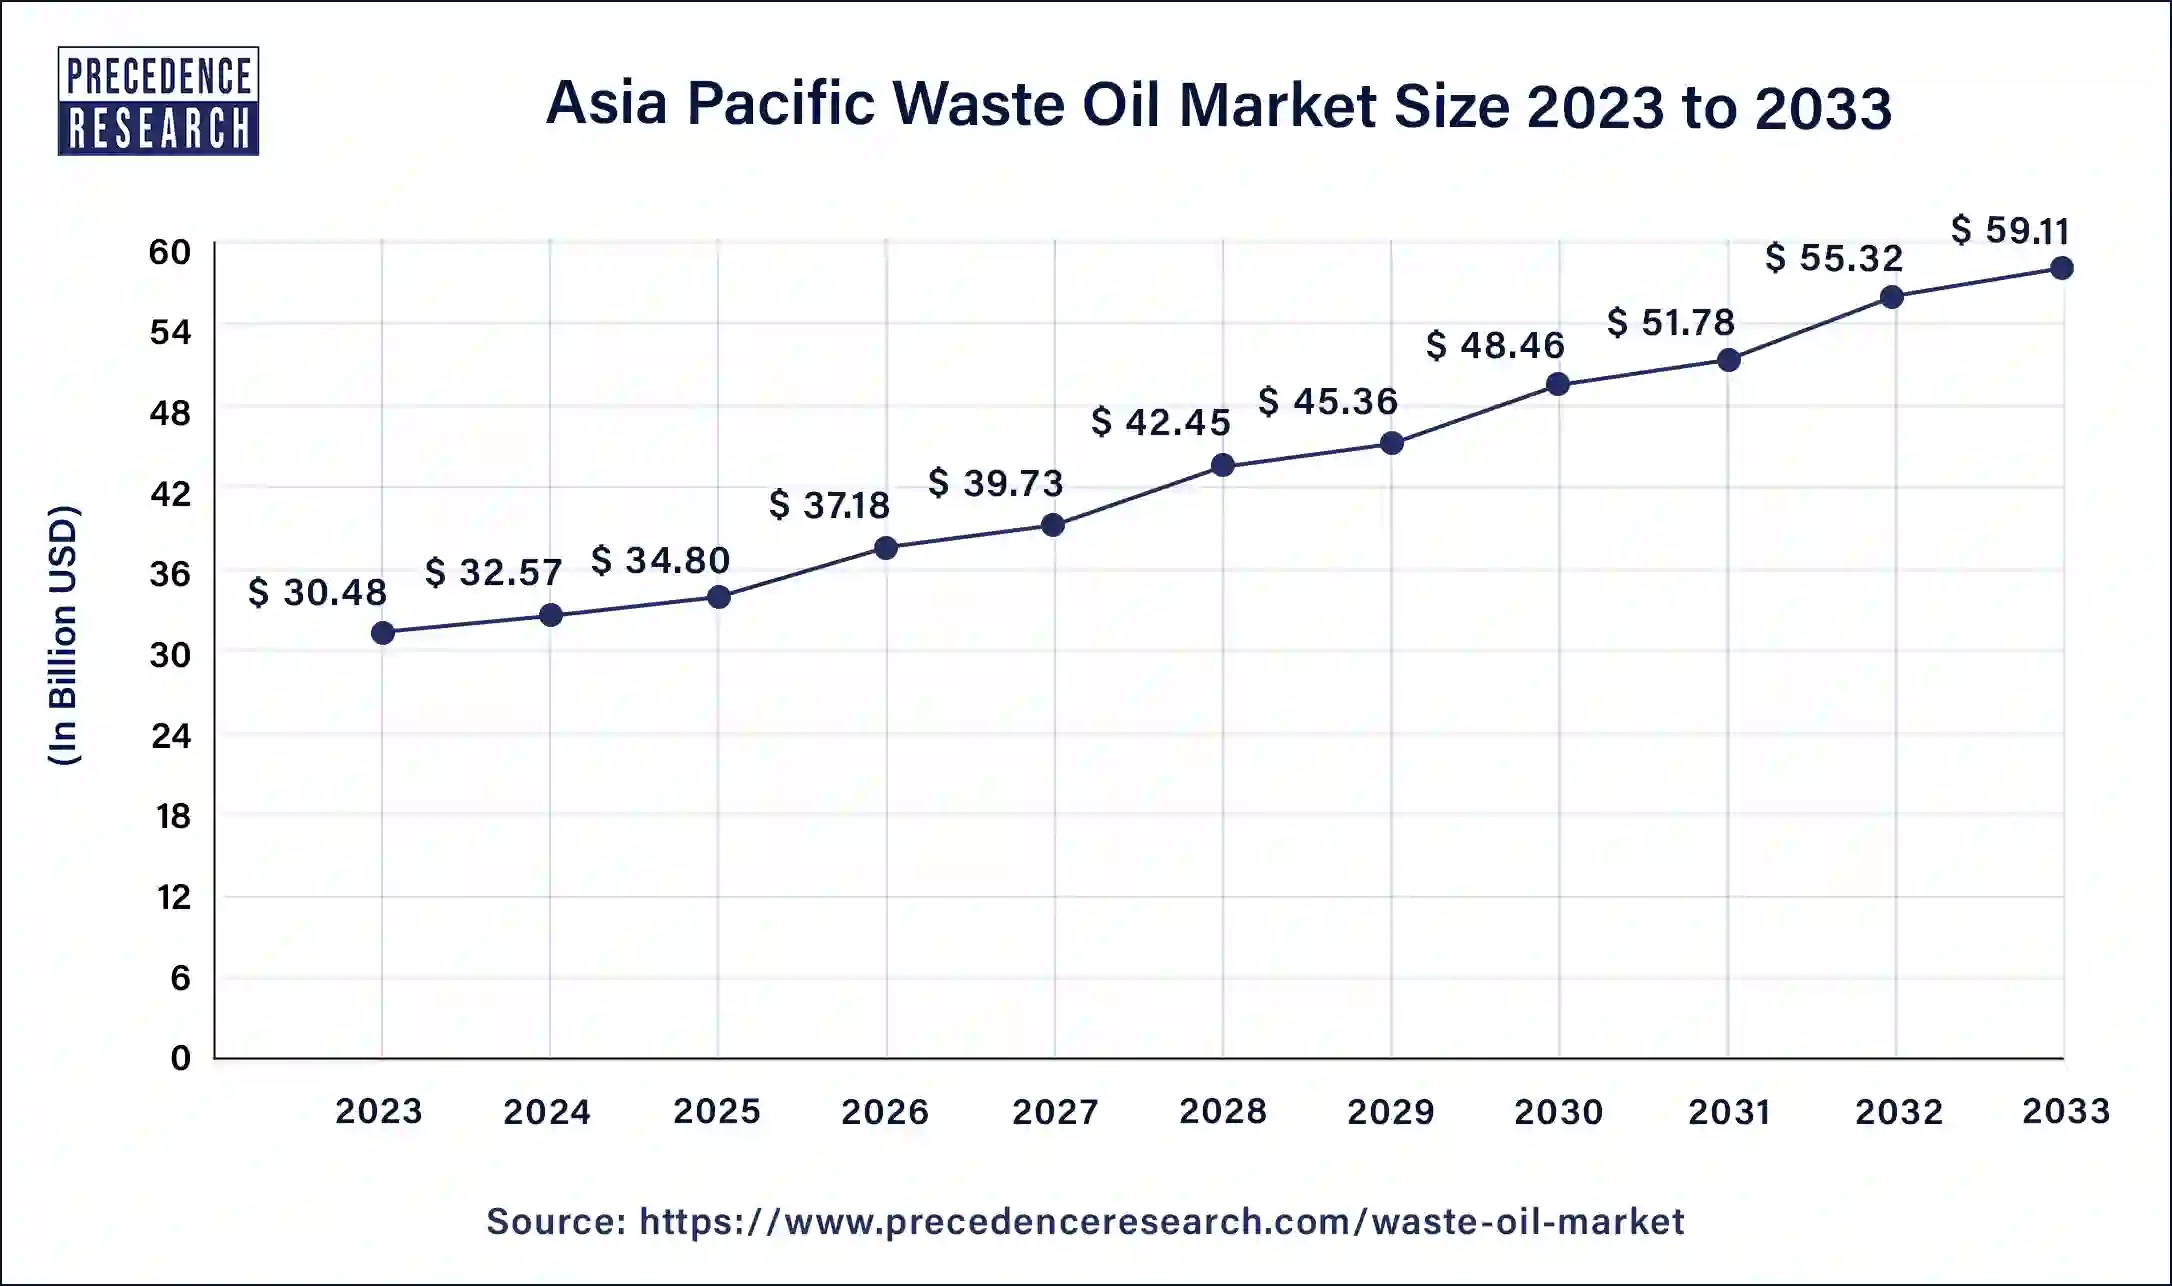 Asia Pacific Waste Oil Market Size 2024 to 2033